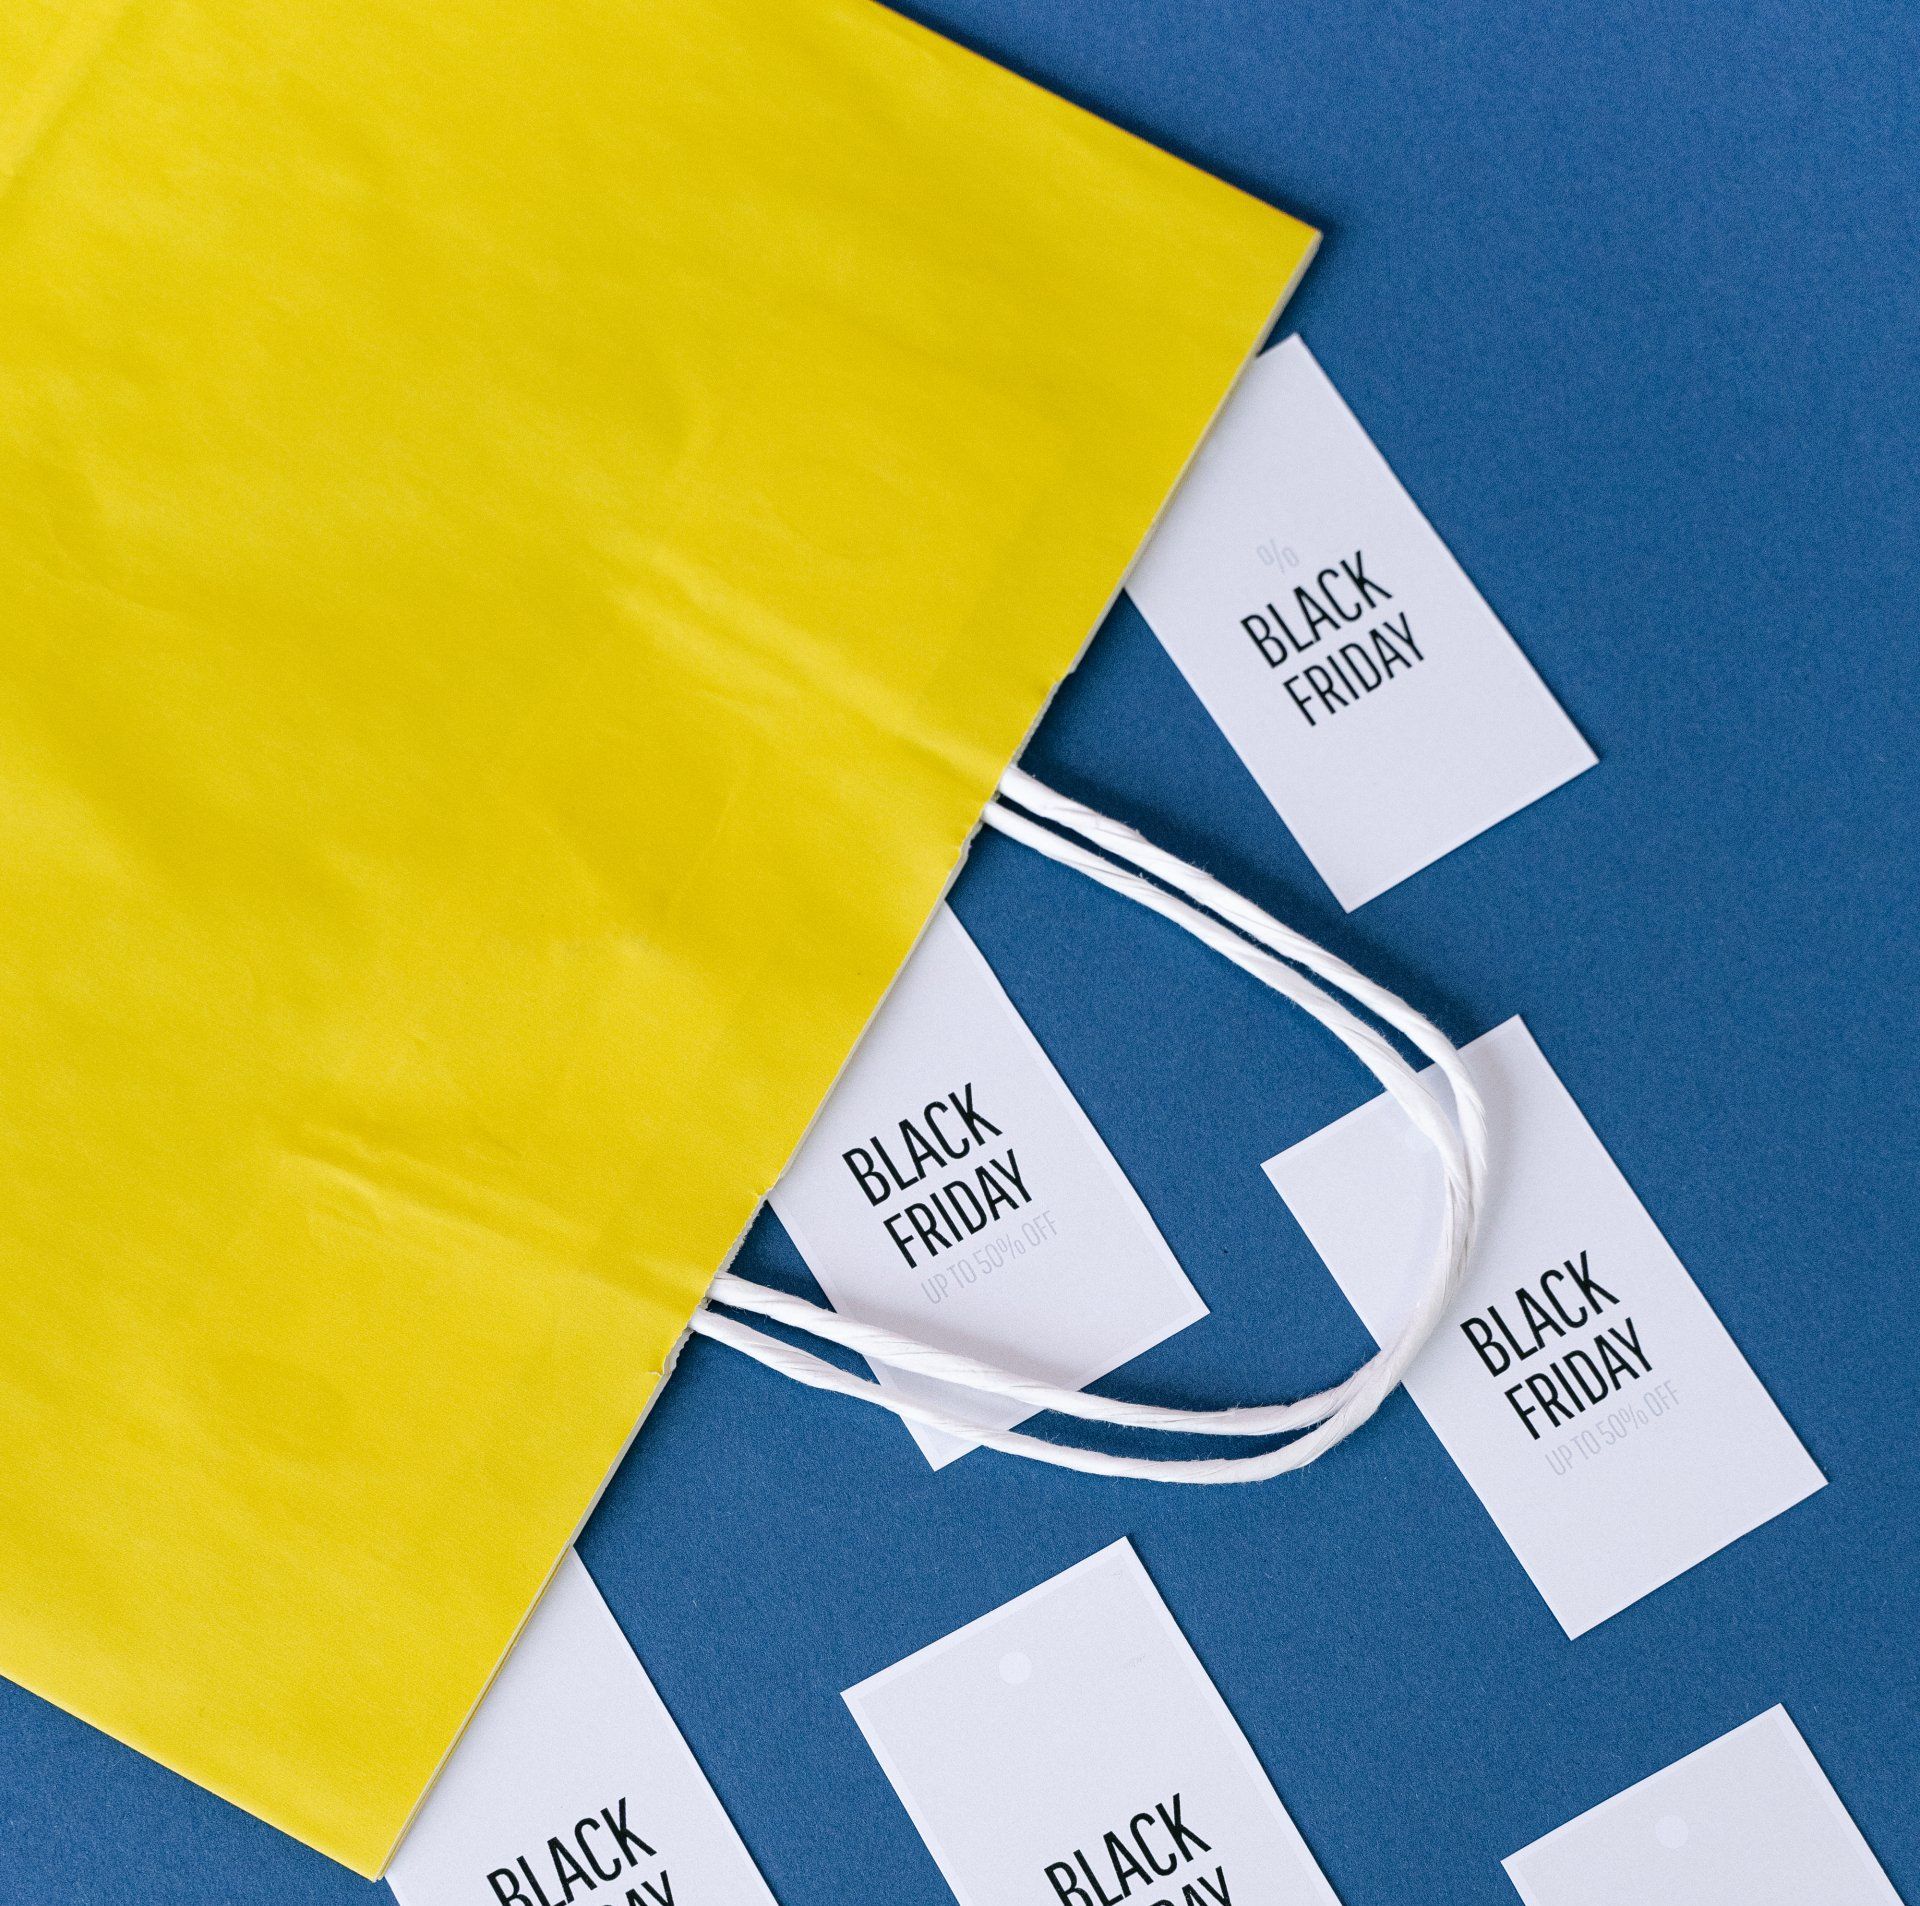 black friday sale 50% off flyers coming out of a yellow bag